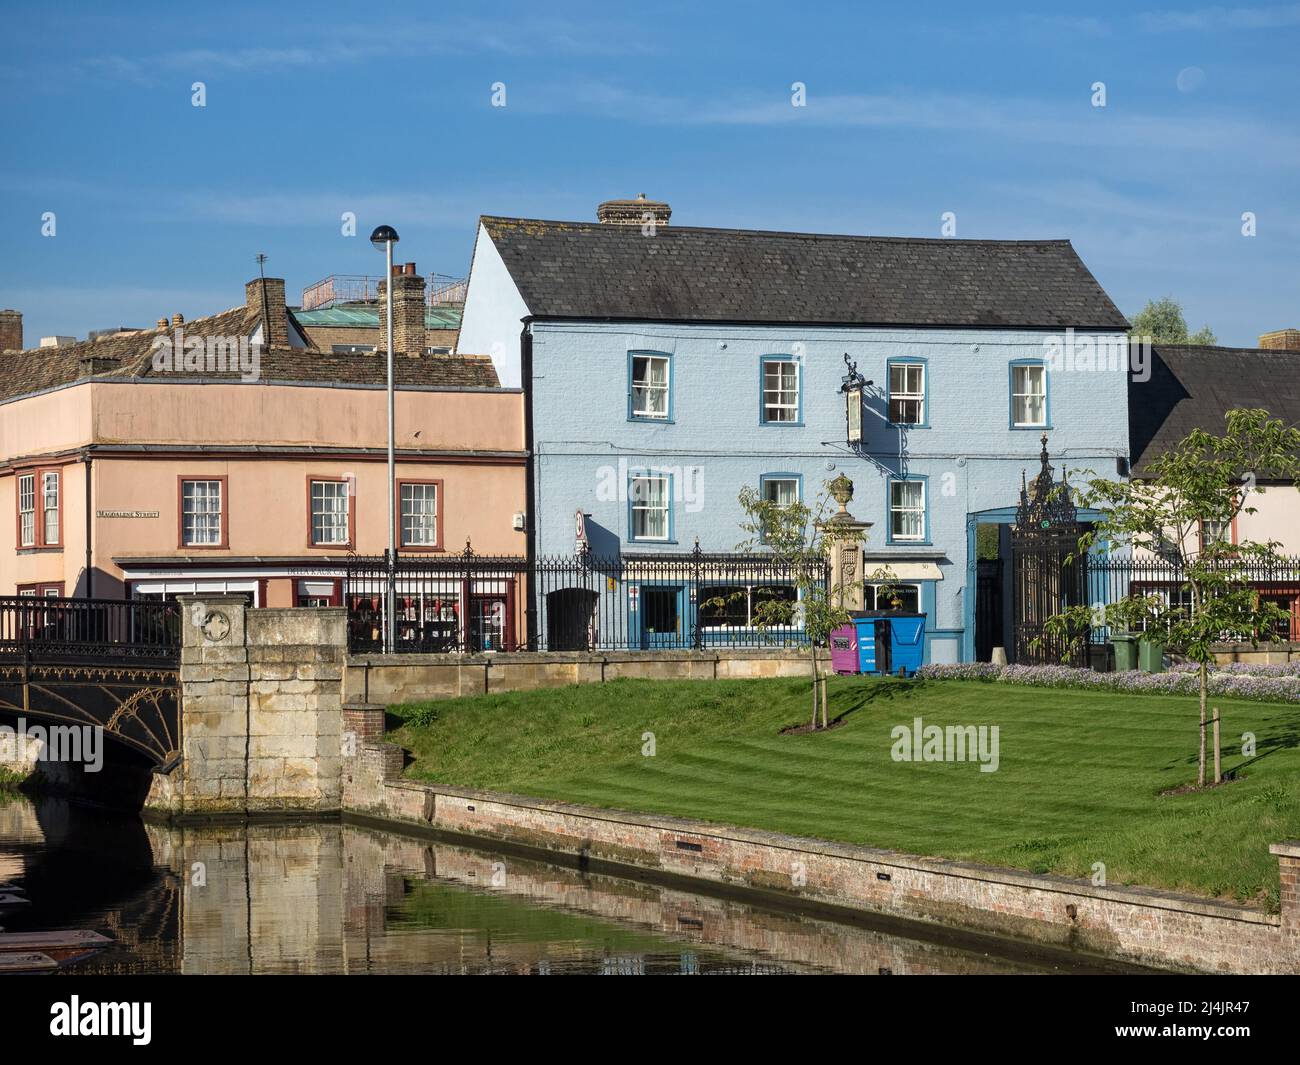 CAMBRIDGE, UK - AUGUST 11, 2017:  View of the Magdalene Bridge and The Pickerel Inn across the River Cam Stock Photo